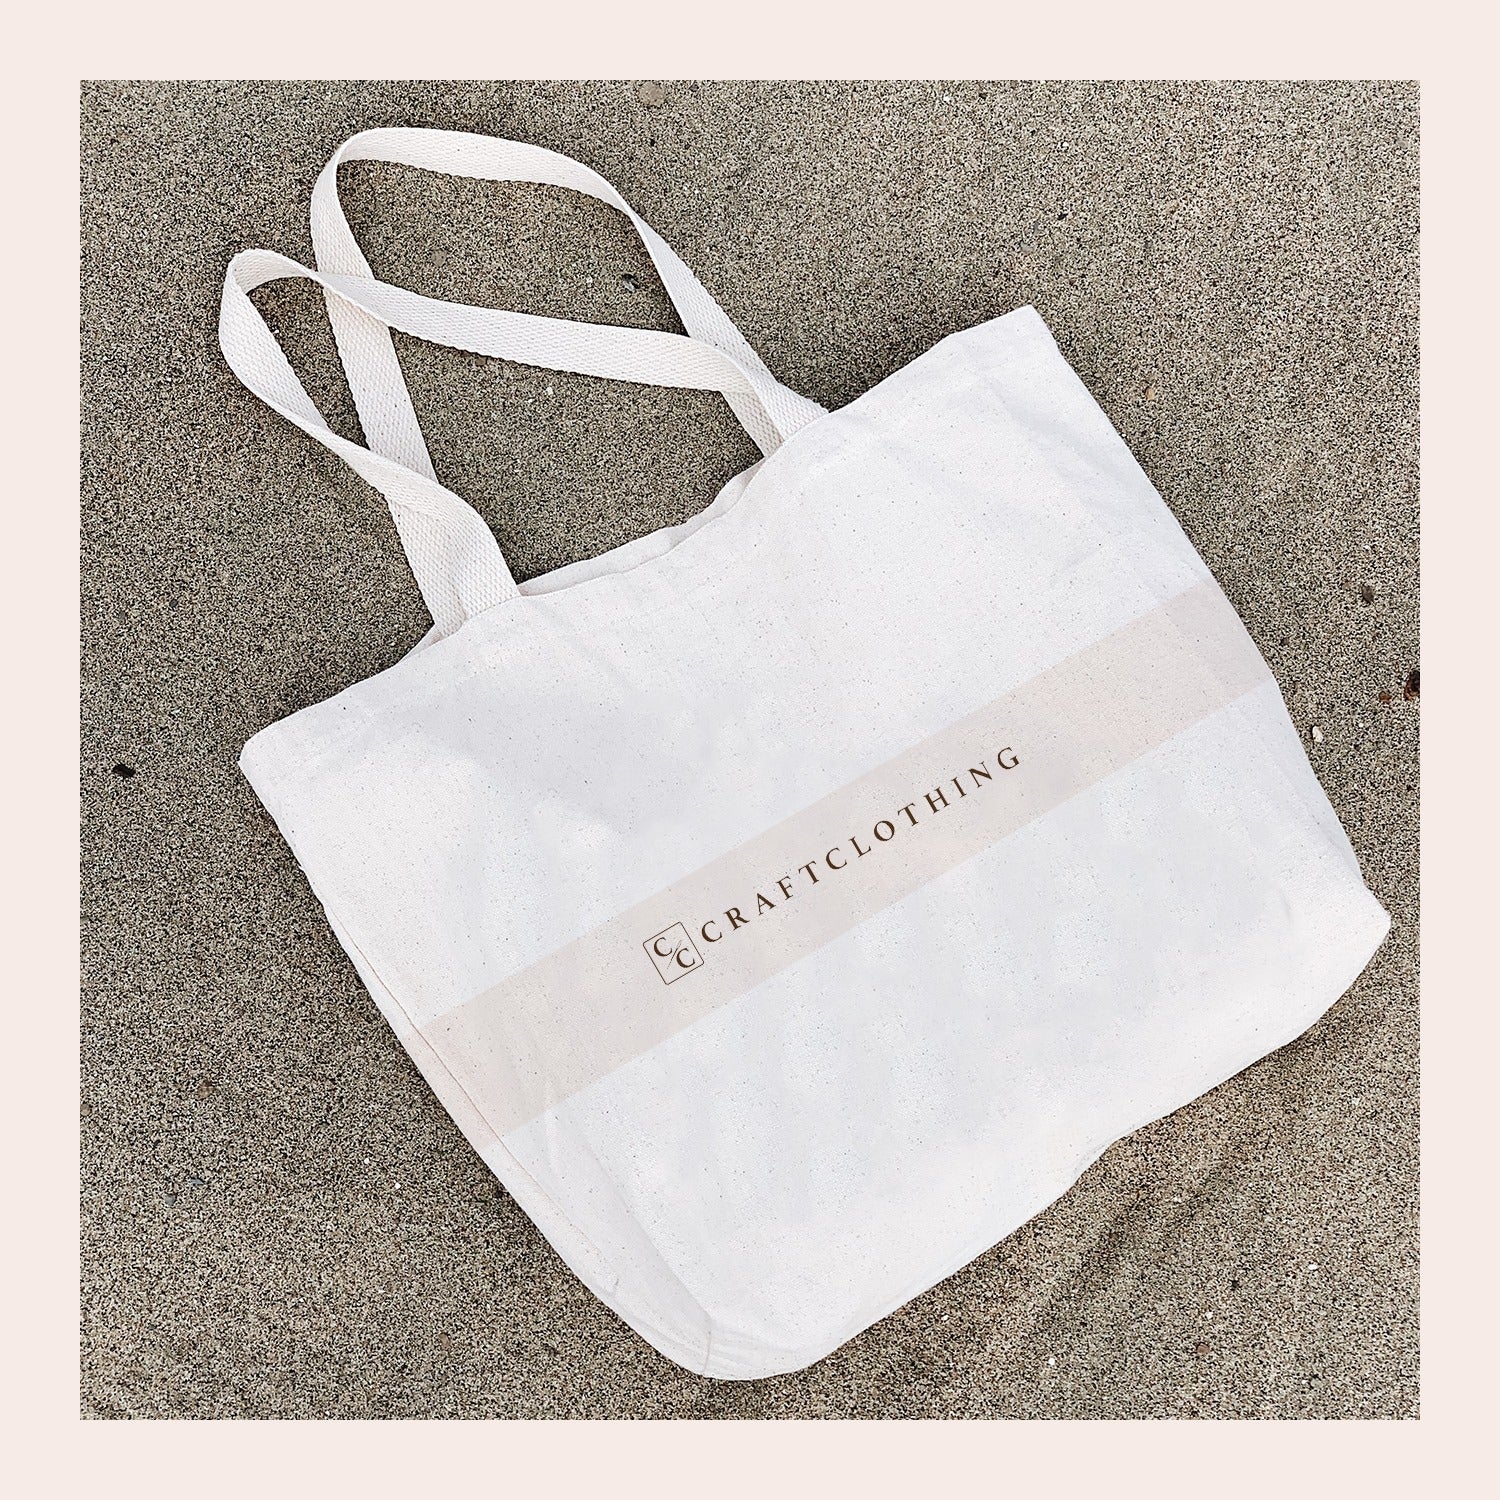 Customized eco-bags are the perfect reusable packing you can use for gifts and giveaways.